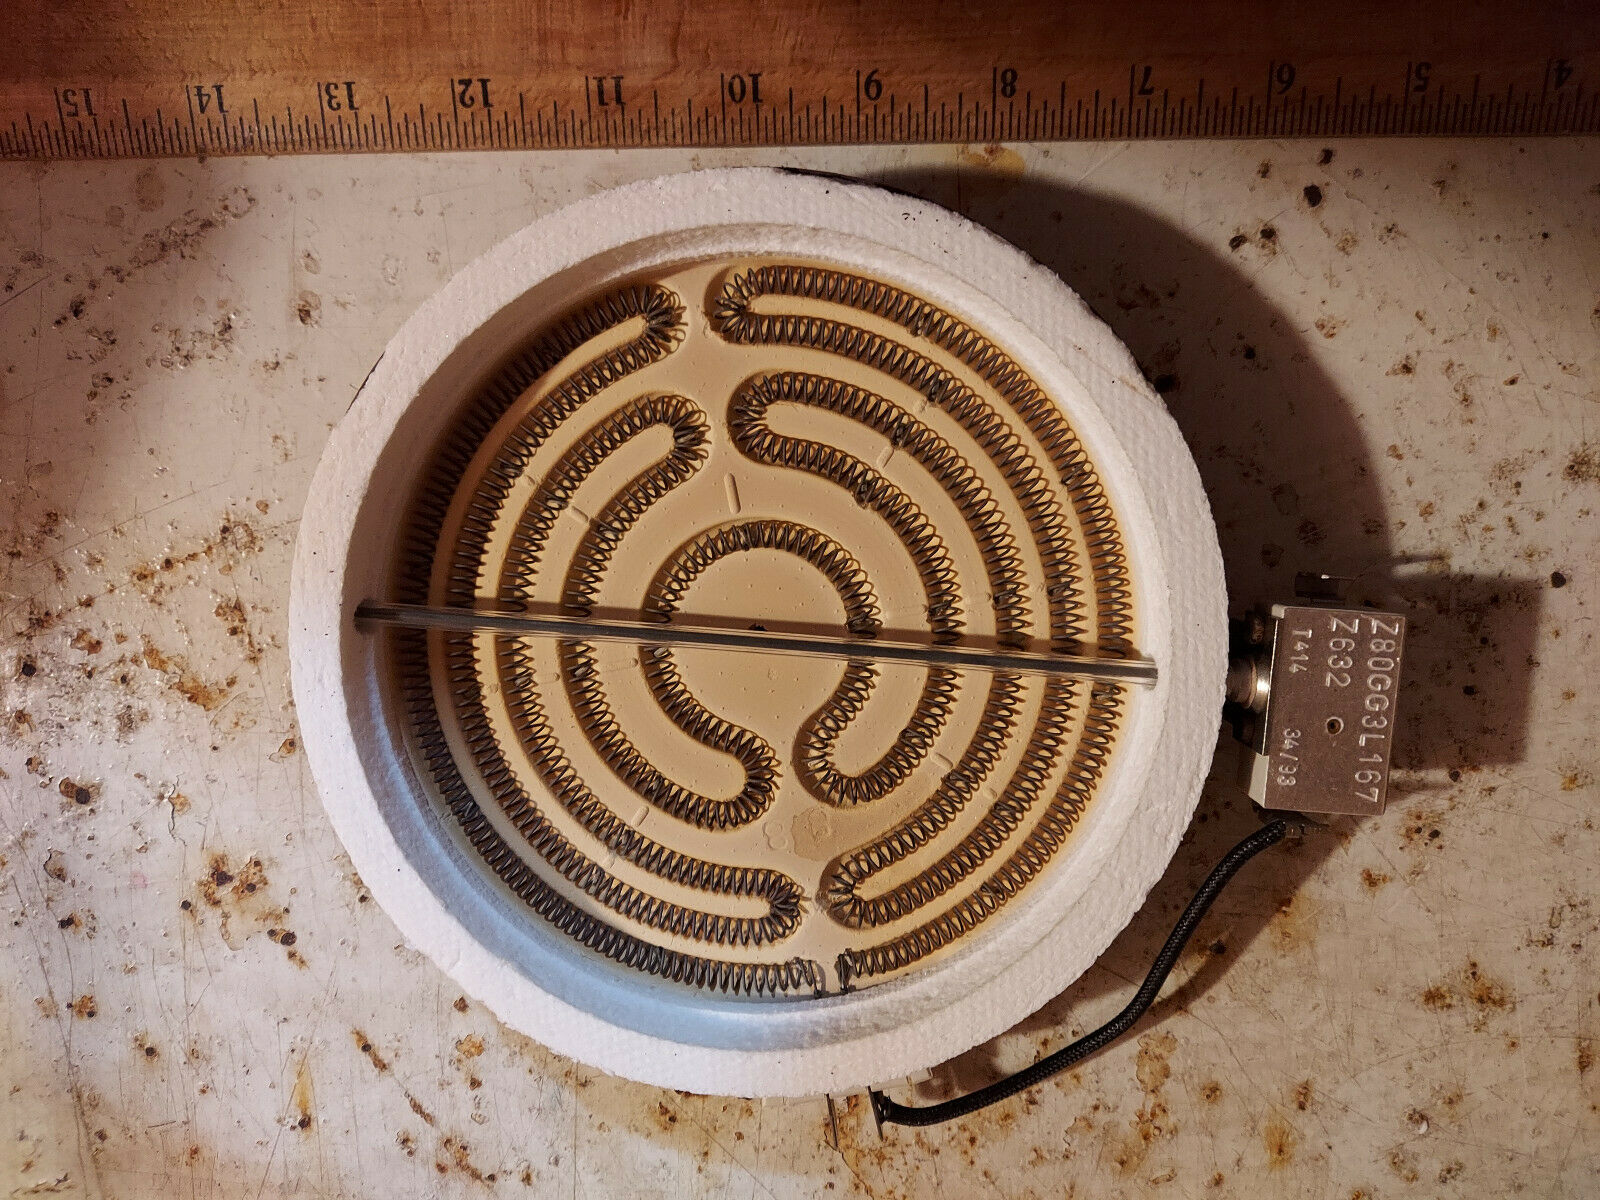 Primary image for 21TT17 CERAMIC STOVE BURNER: 40 OHM, 6.5" DIAMETER, RUST ON SHELL, OTHERWISE GC